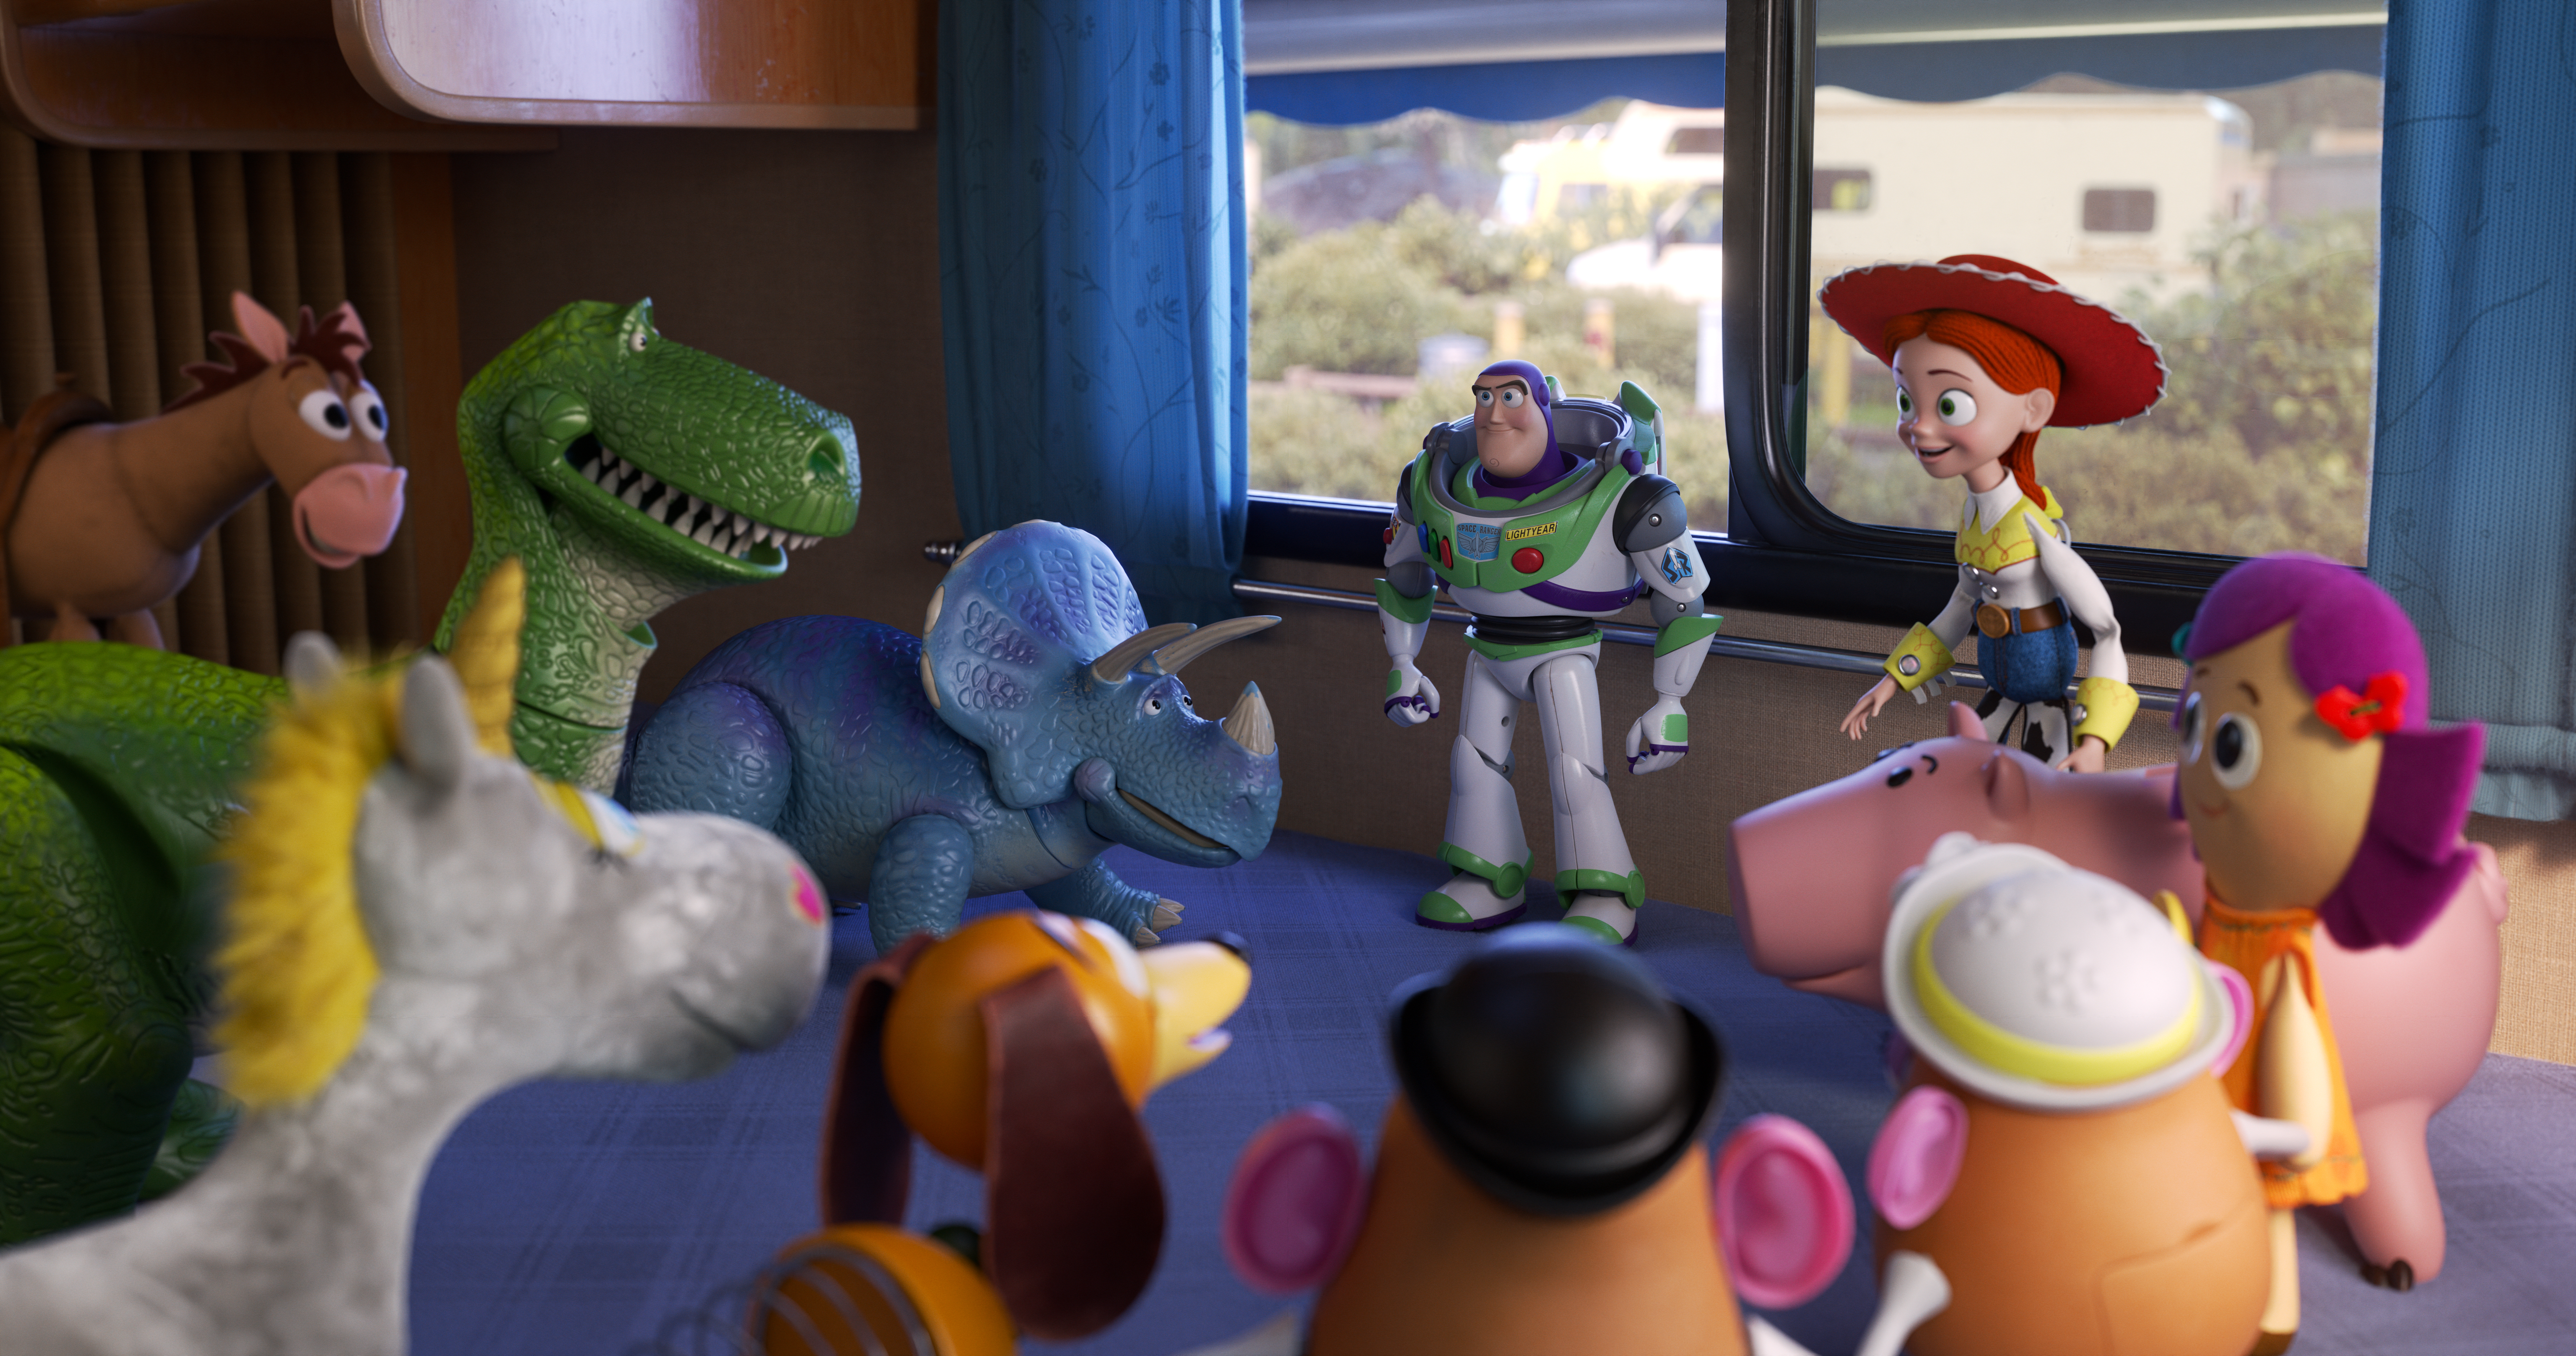 The-Toy-Characters-From-Toy-Story-4